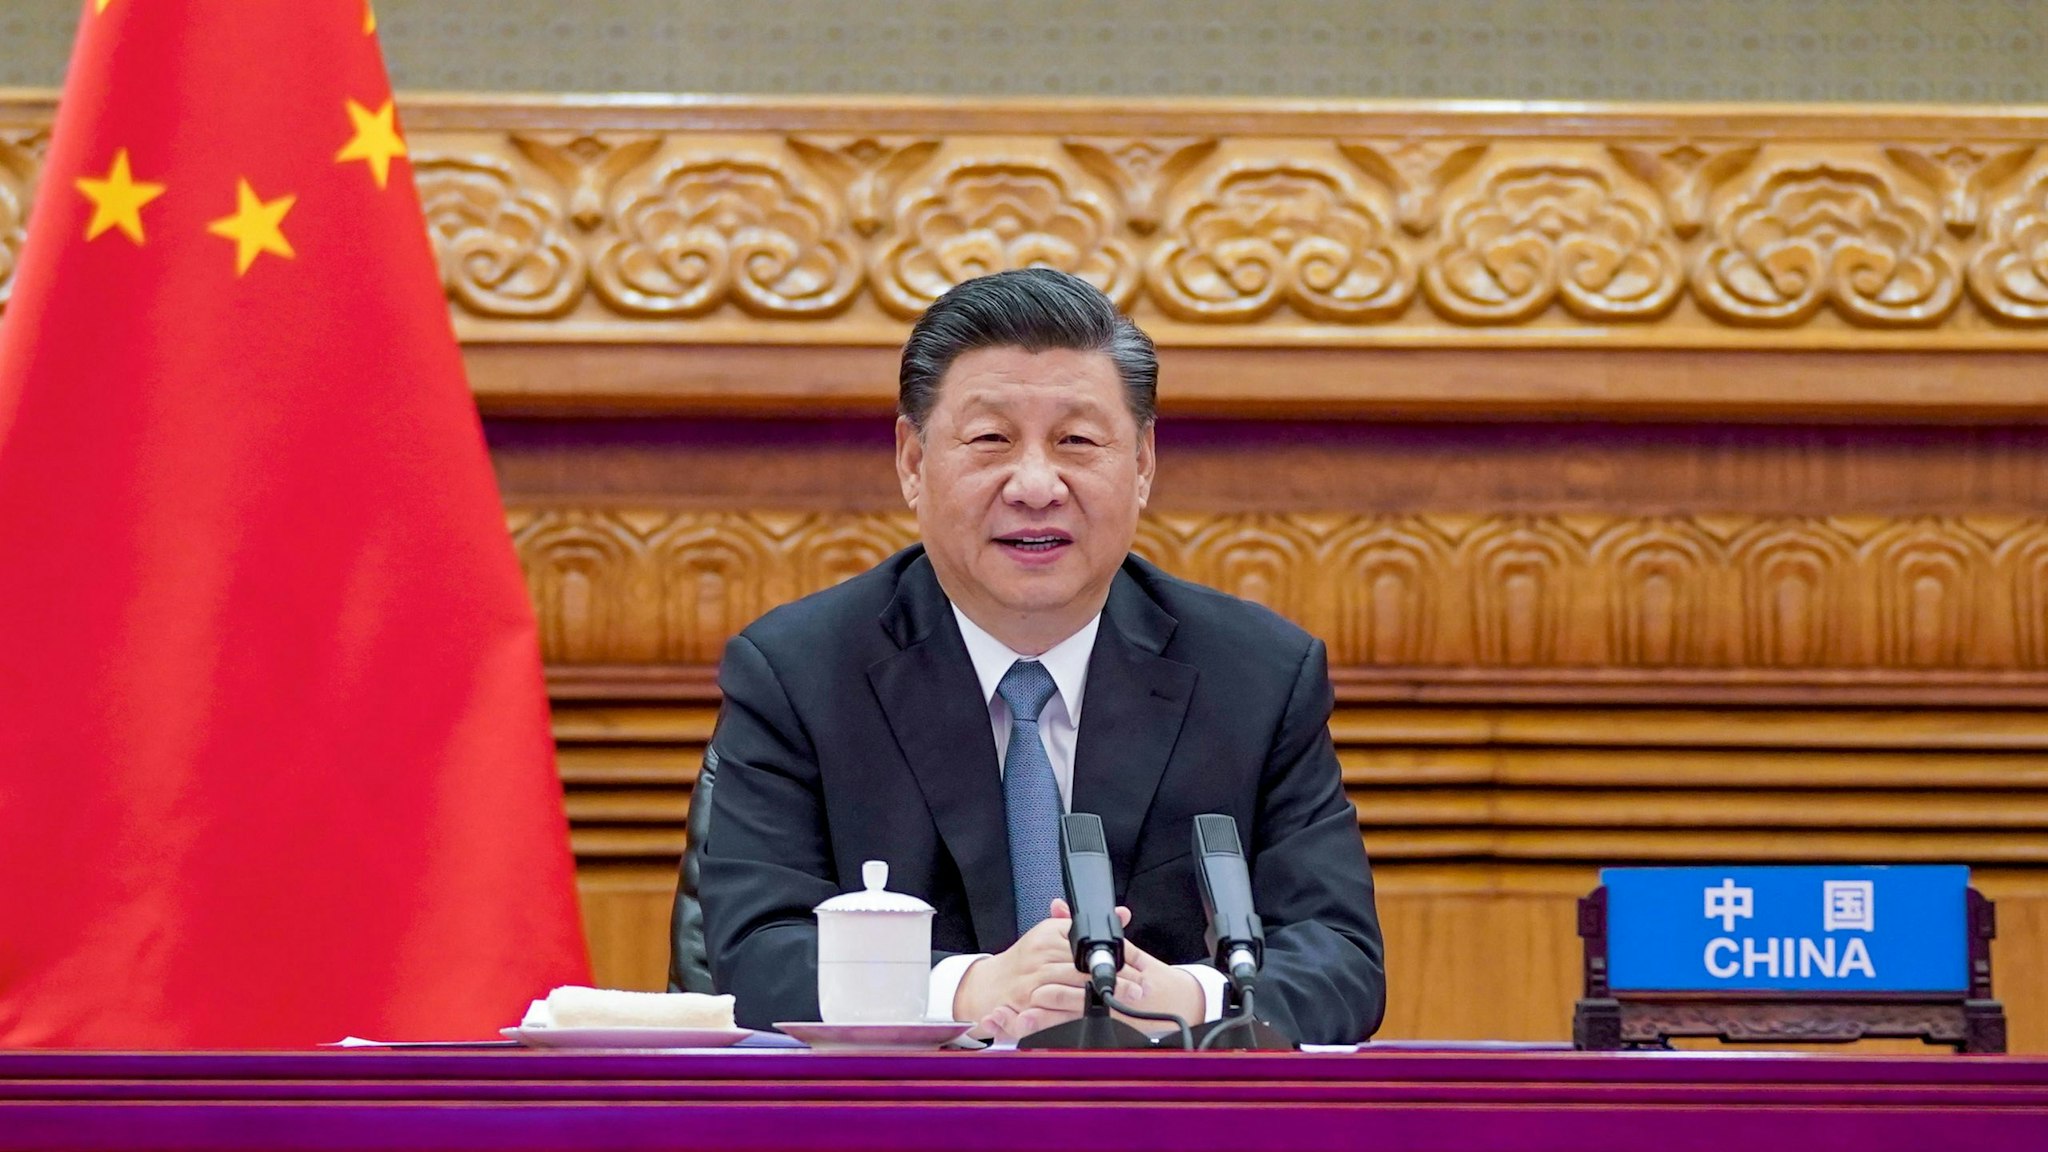 BEIJING, April 16, 2021 -- Chinese President Xi Jinping attends a video summit with French President Emmanuel Macron and German Chancellor Angela Merkel in Beijing, capital of China, April 16, 2021.